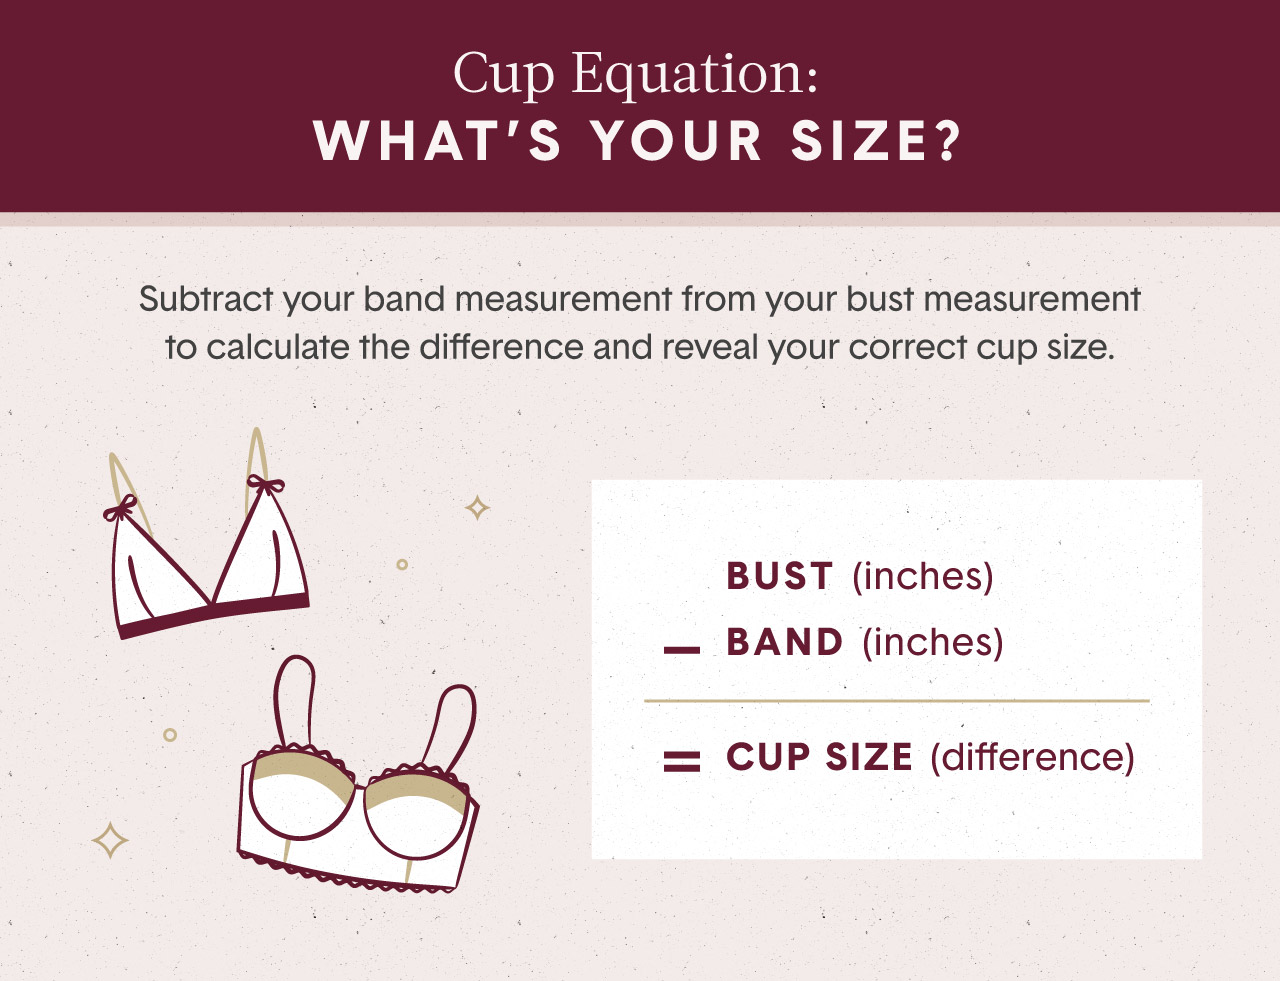 determine-your-cup-size.jpg